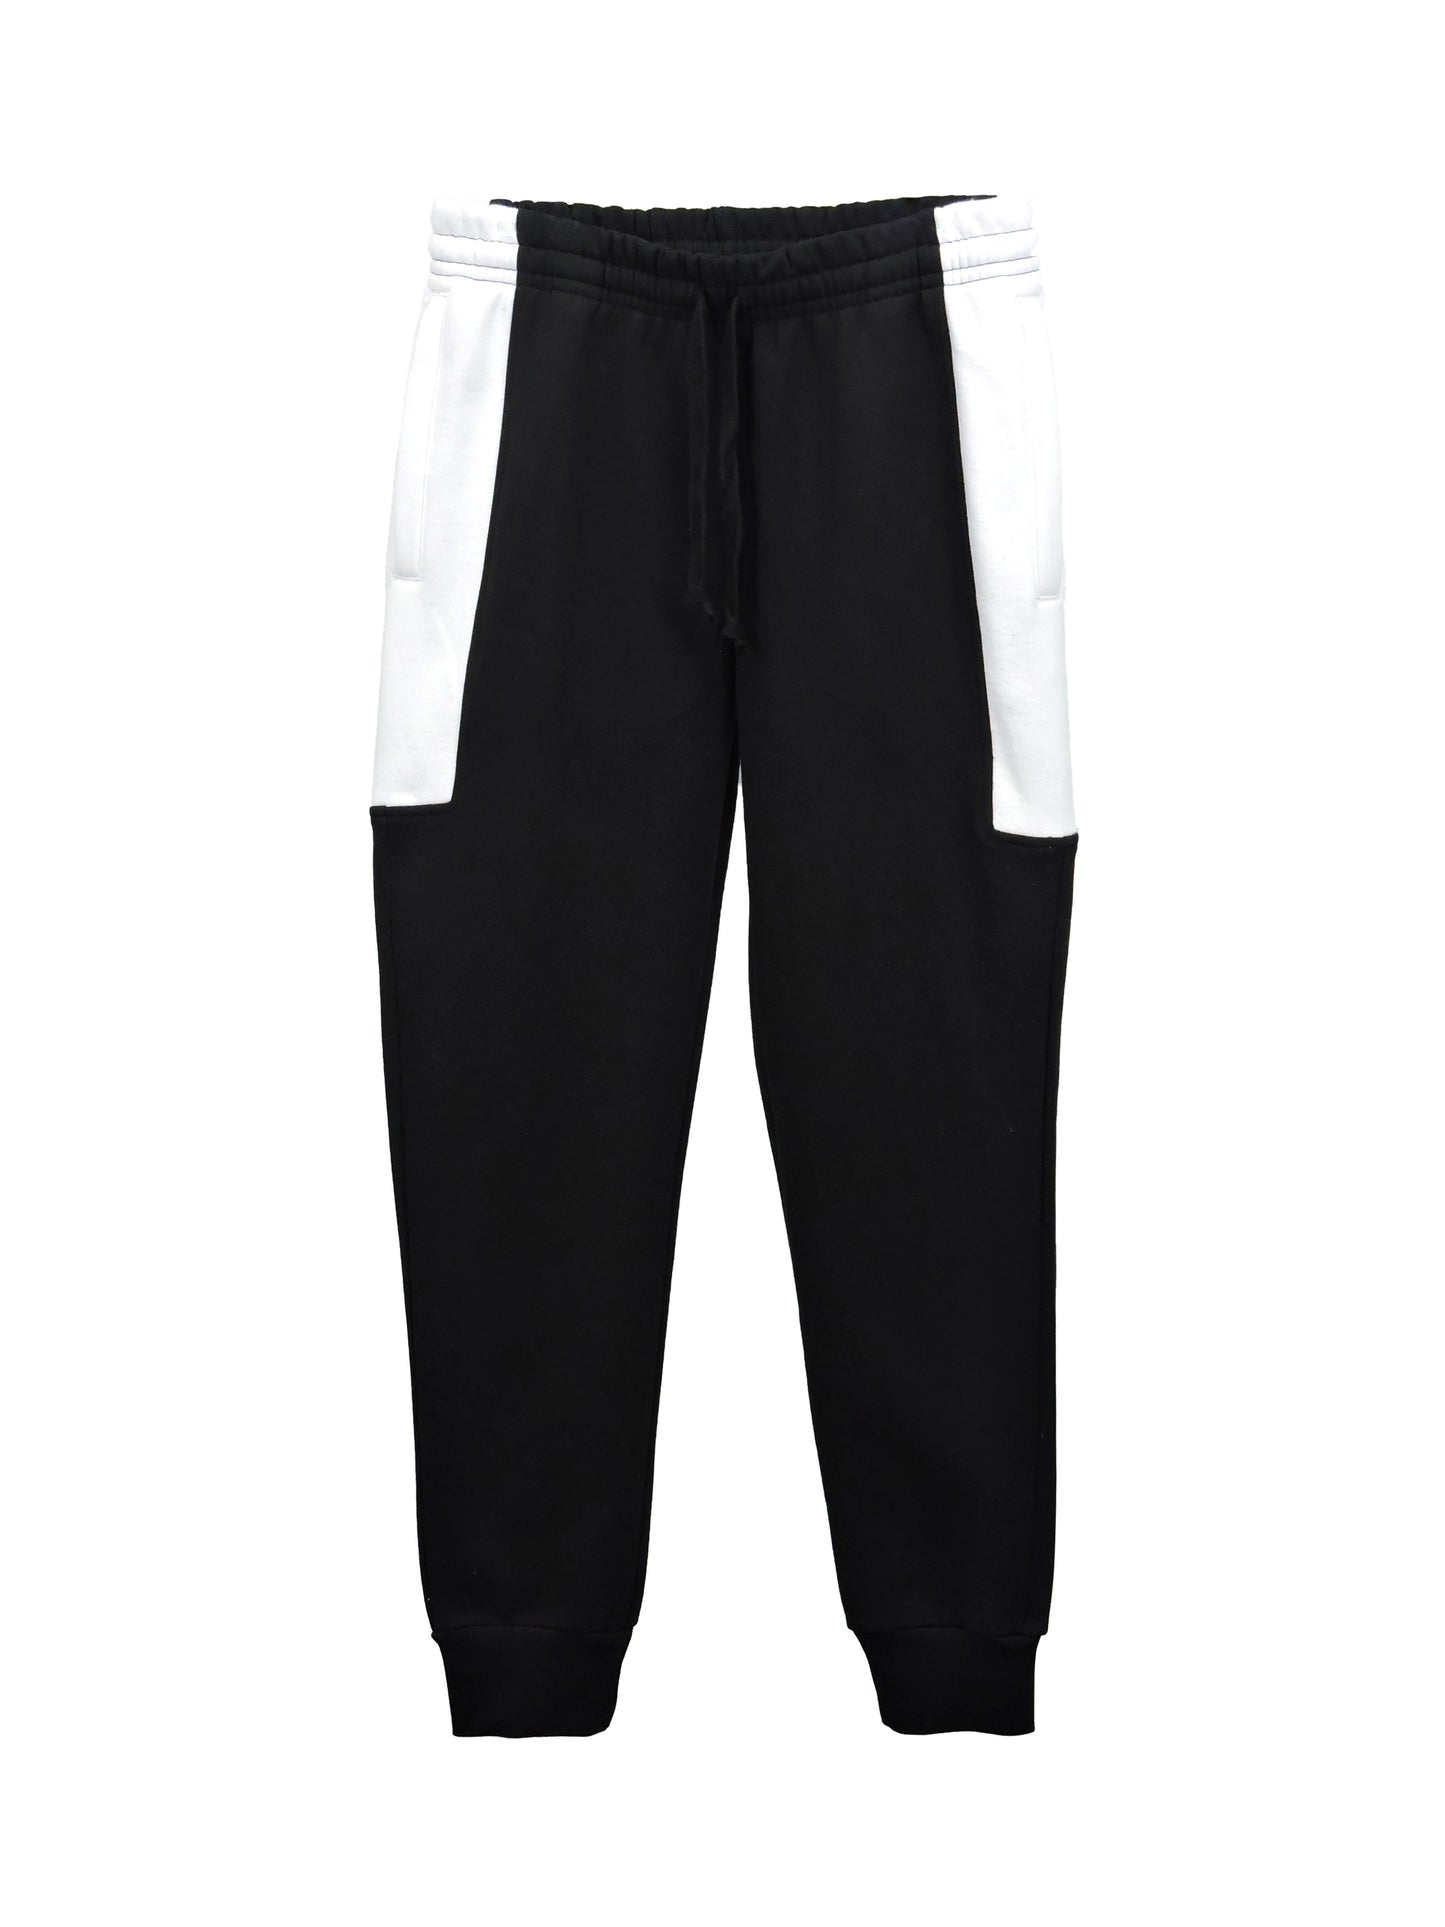 Block jogger with black inseam and topside and white pockets and outer waist.